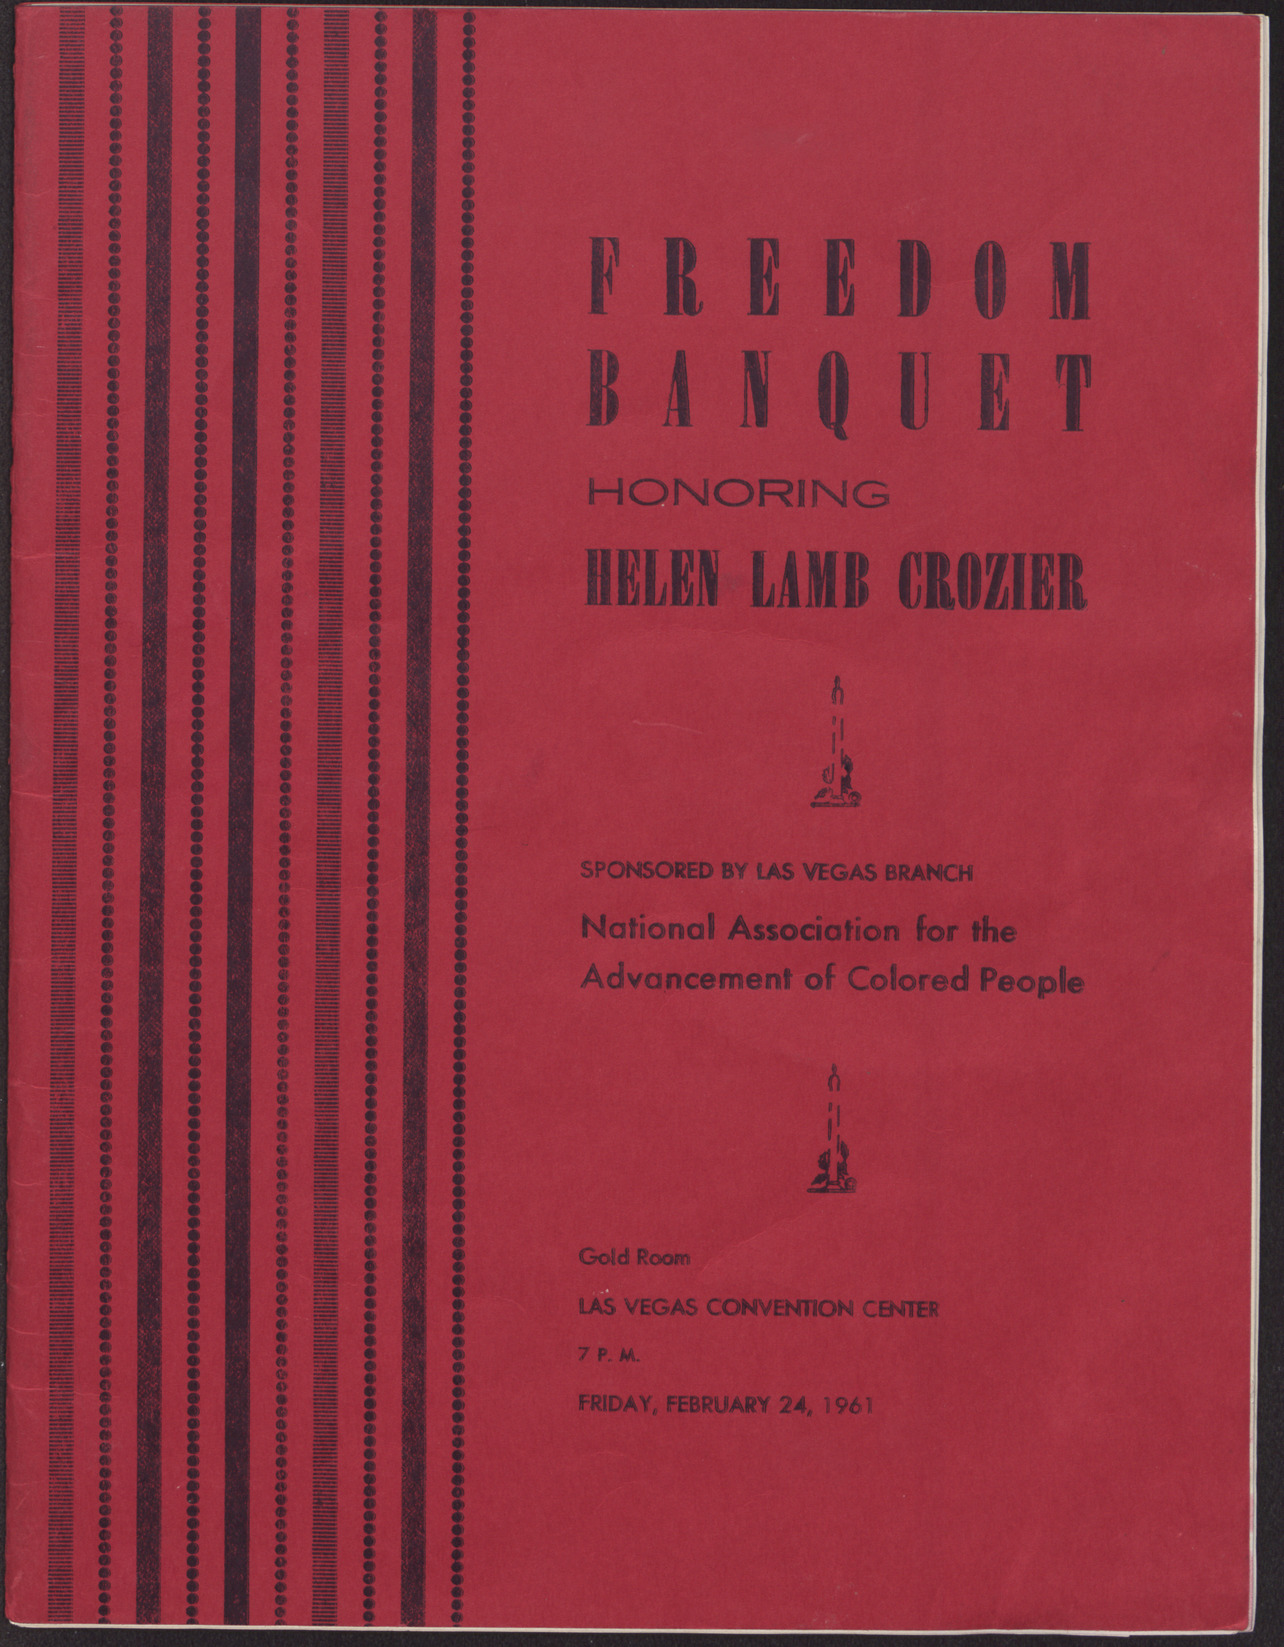 Program for the Freedom Banquet honoring Helen Lamb Crozier (36 pages), Friday February 24, 1961